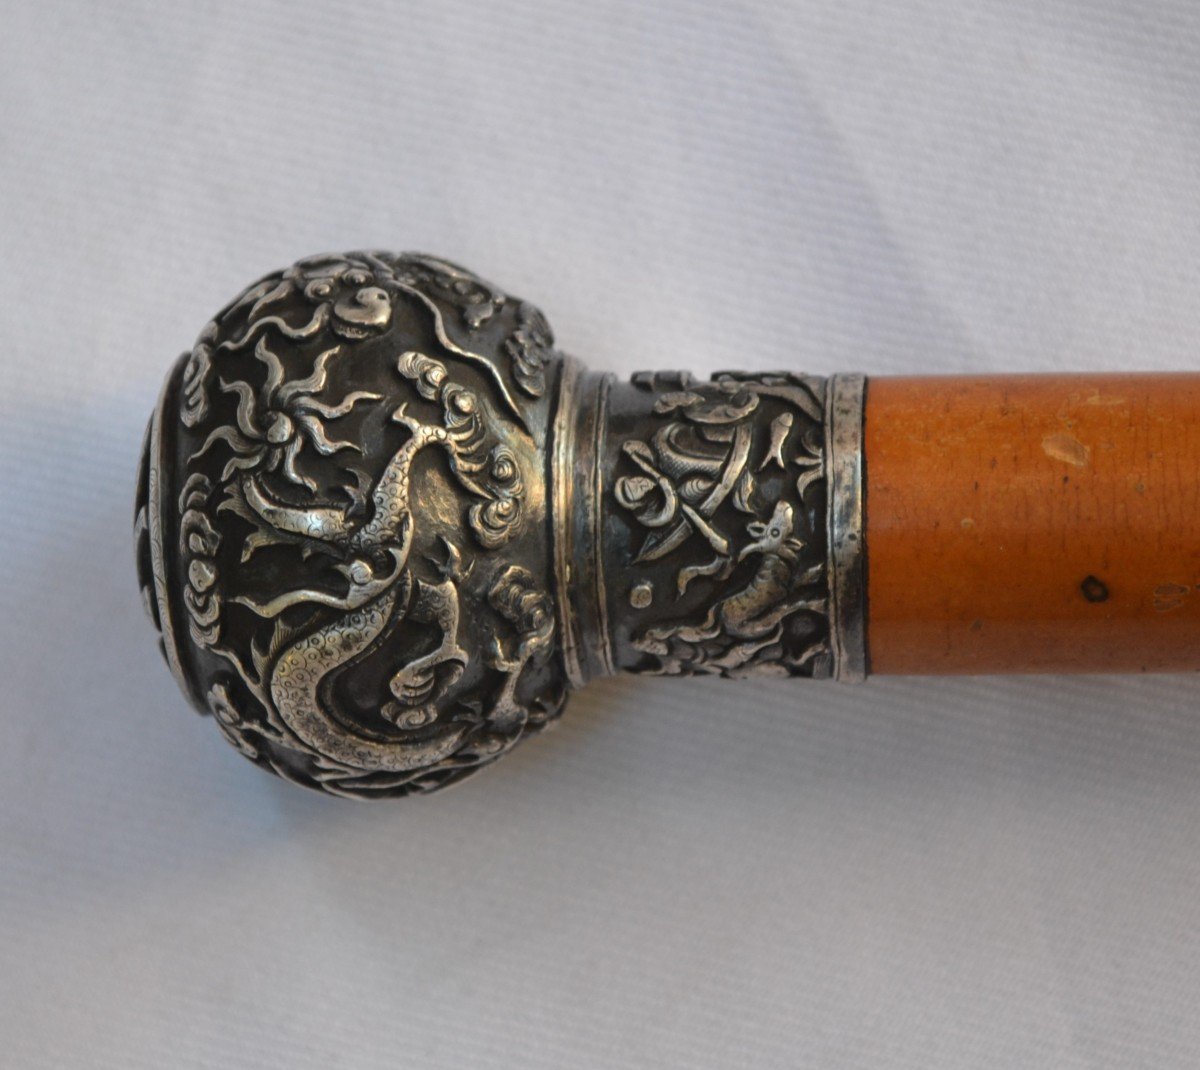 Cane In Cast Silver, Chiseled With Dragons. Shaft In Huang-hualy. China Or Vietnam 19° Century.-photo-7